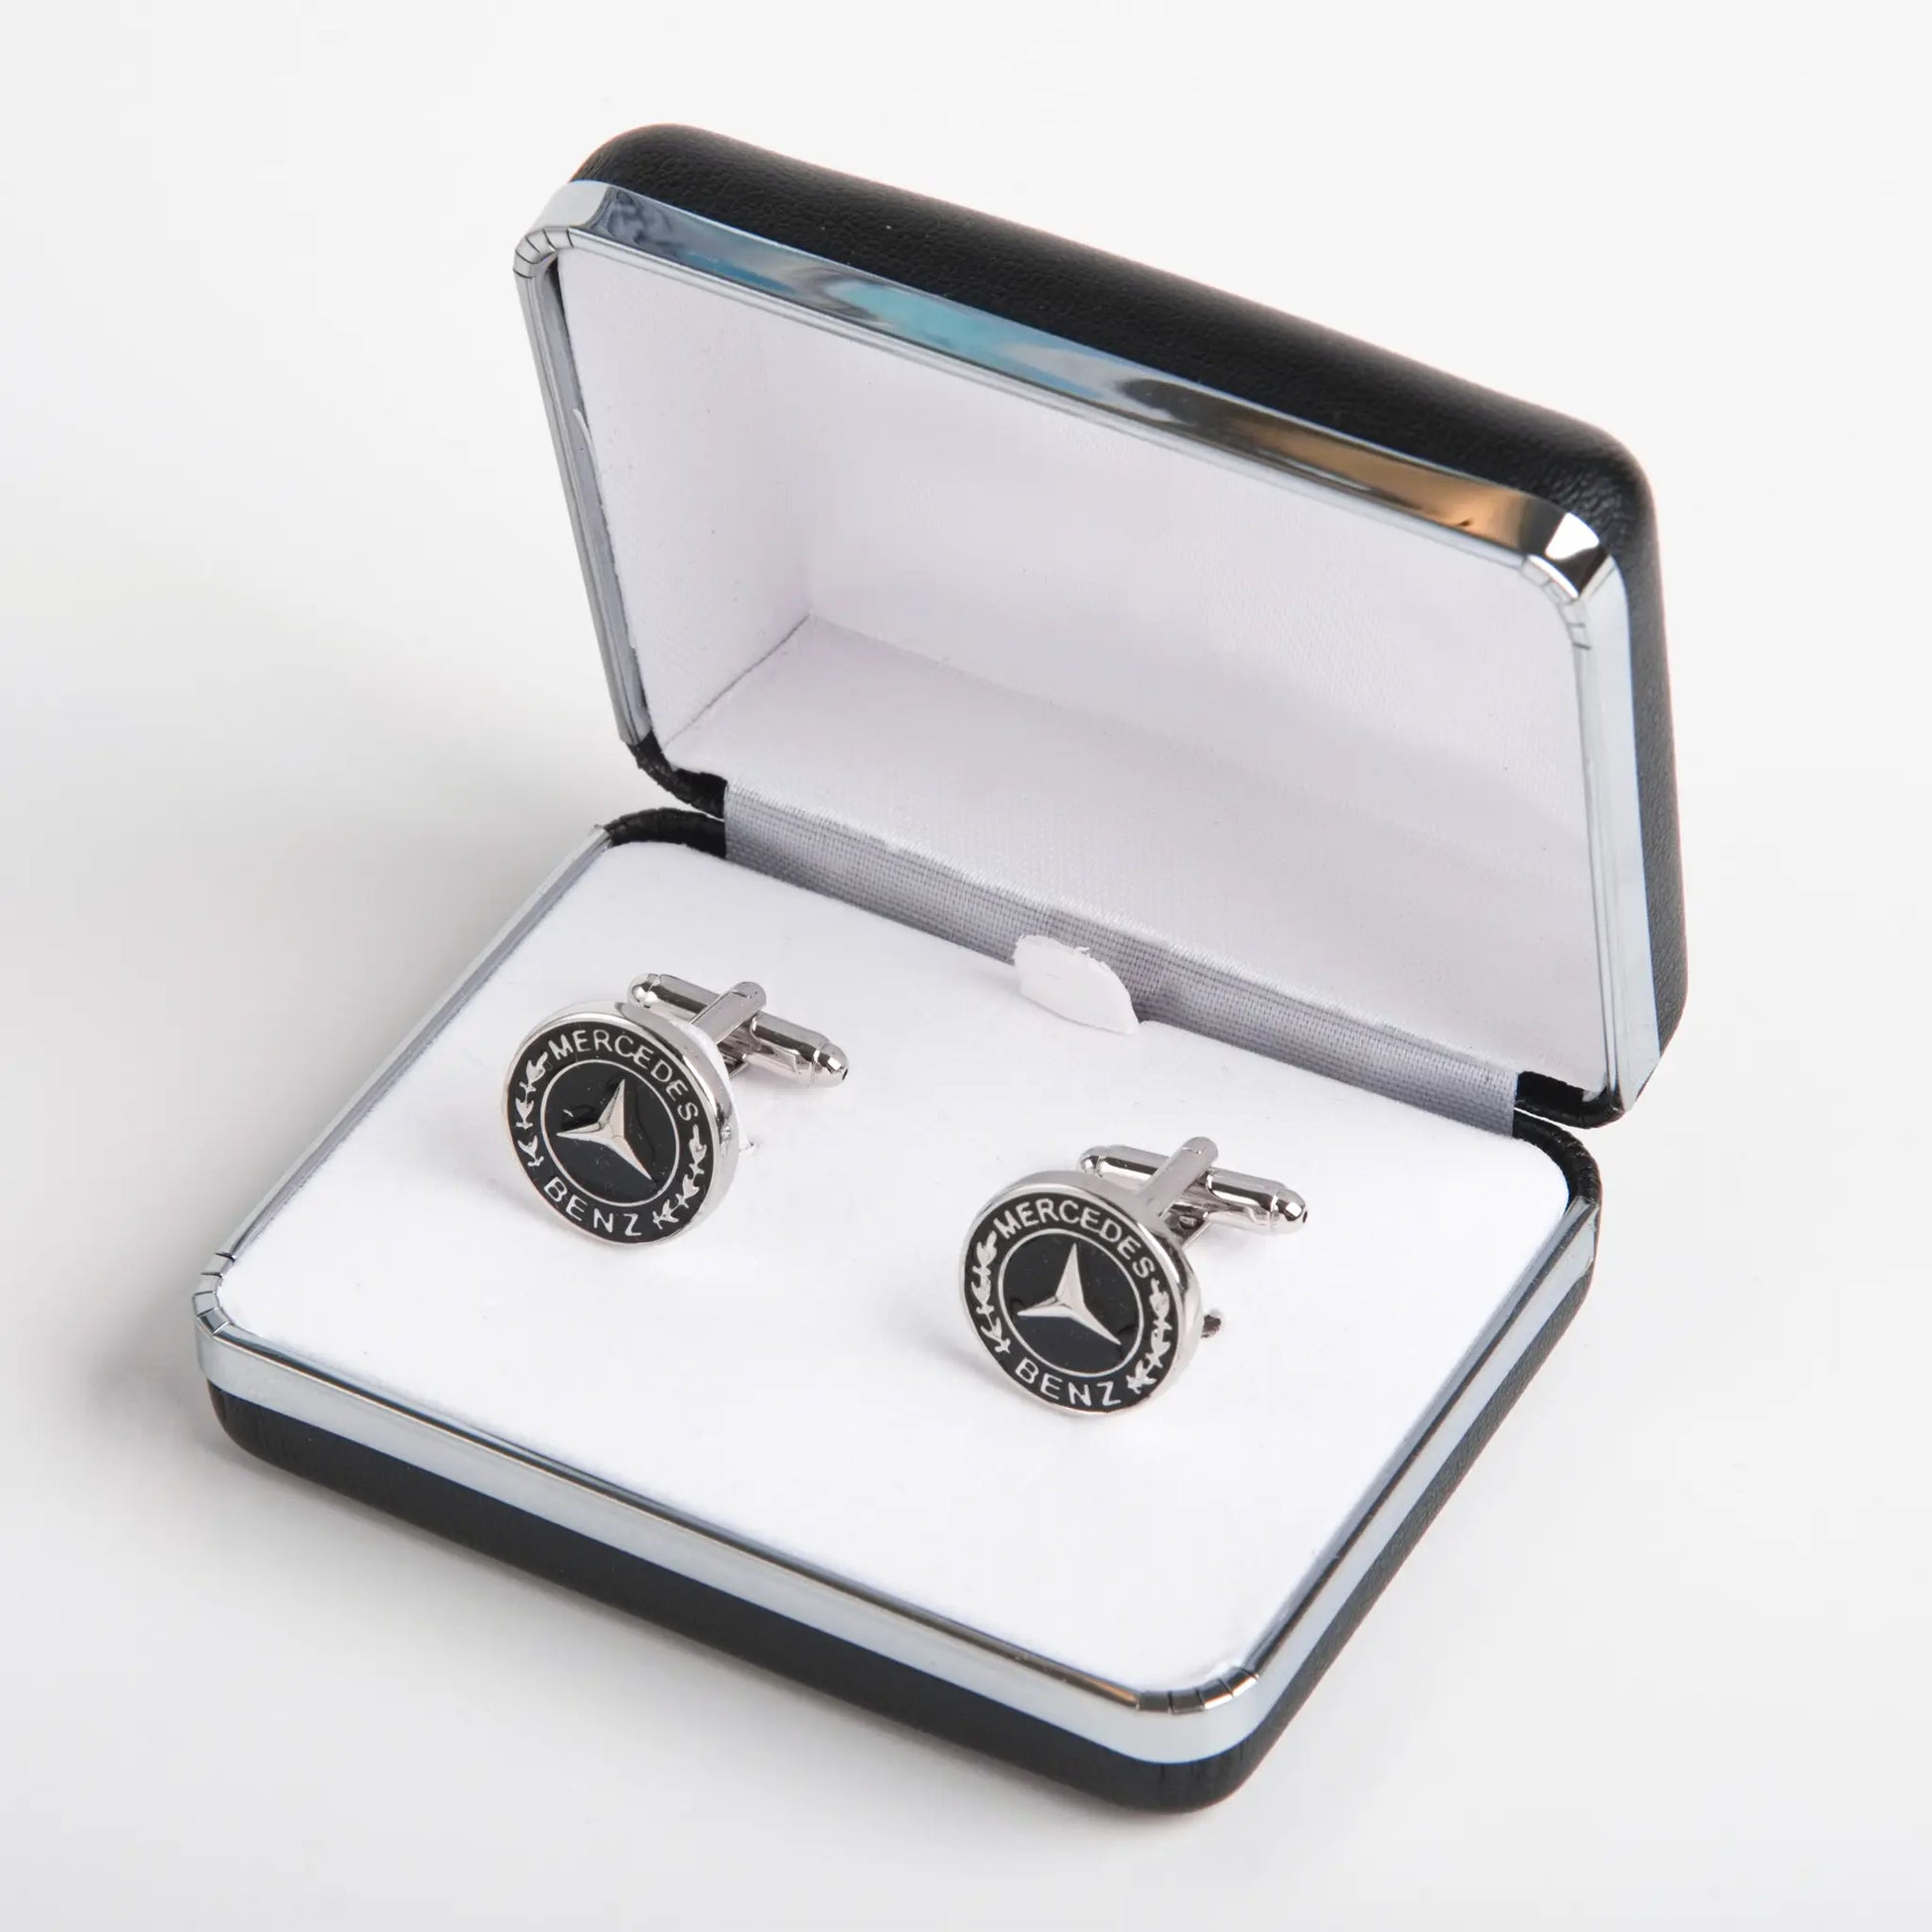 Mercedes Cuff Link - Larimars Clothing Men's Formal and casual wear shirts